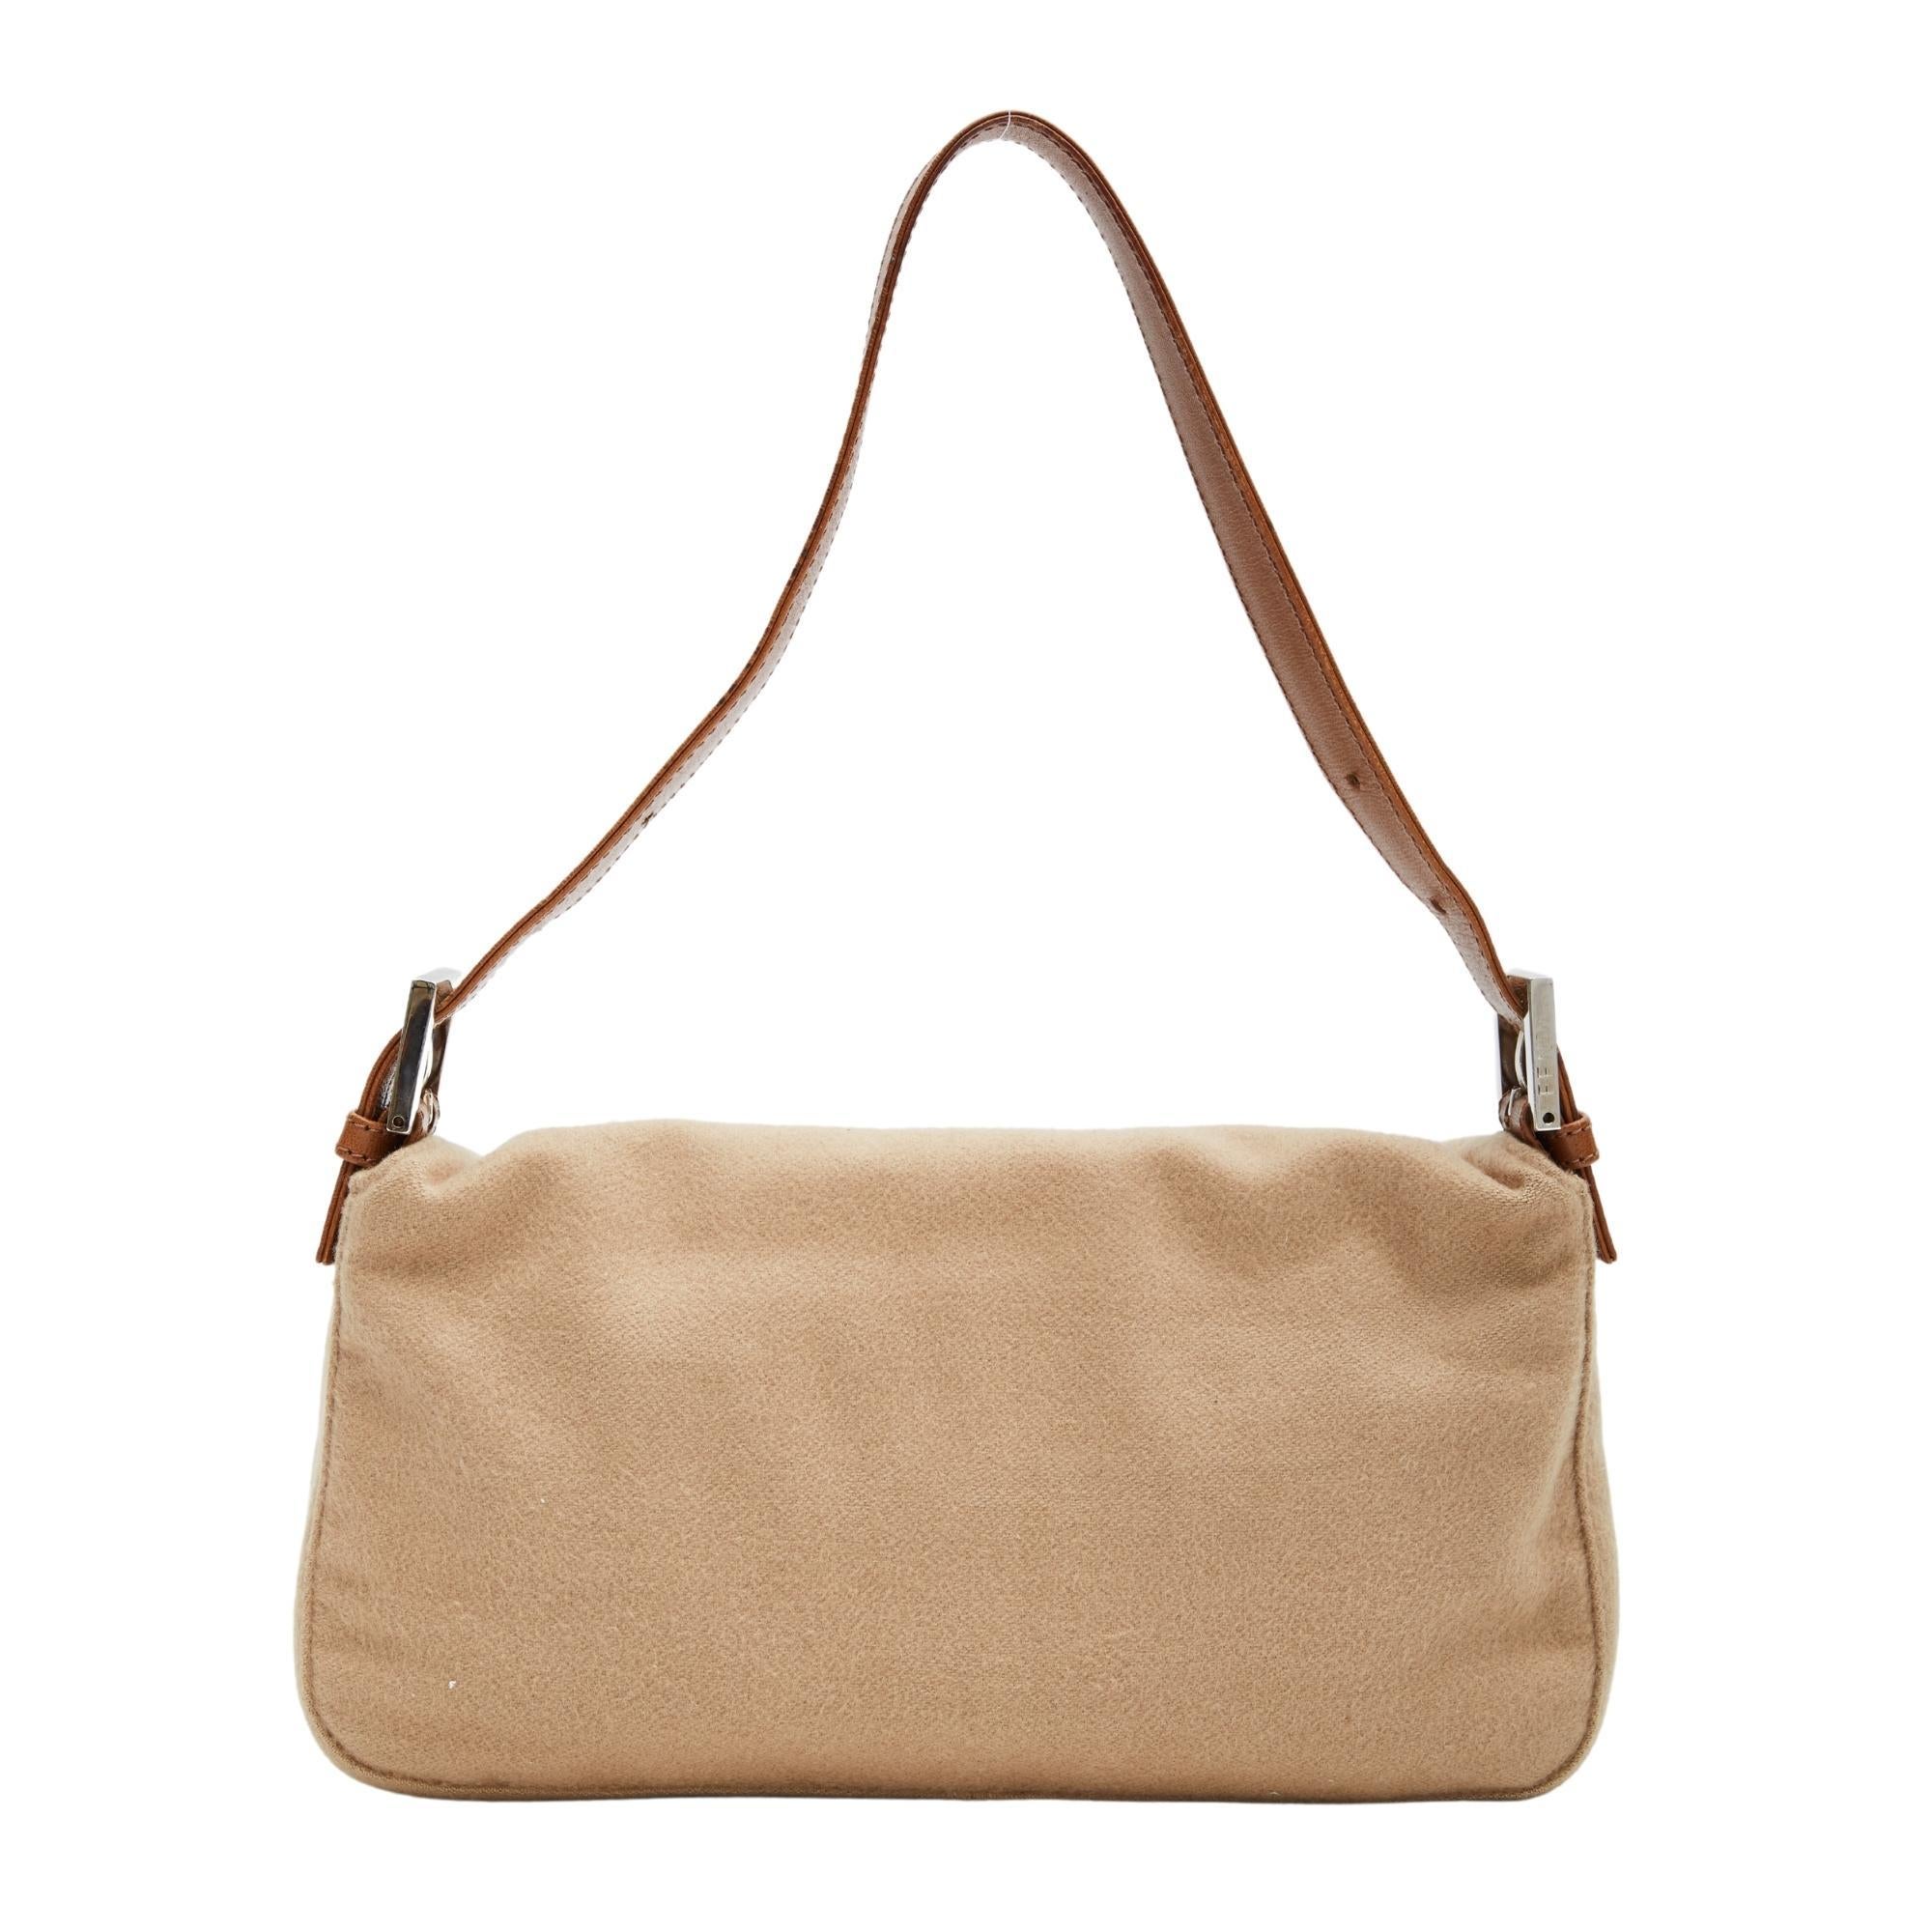 Color:  Light beige/ light brown
Material: Cloth
Item code: 2454/26424/099
Comes with: No brand bust bag
Condition: Good, FF detail on buckle was glued back on. Glue on hardware. Clean bag looks rarely used with minimal signs of use.
Made in